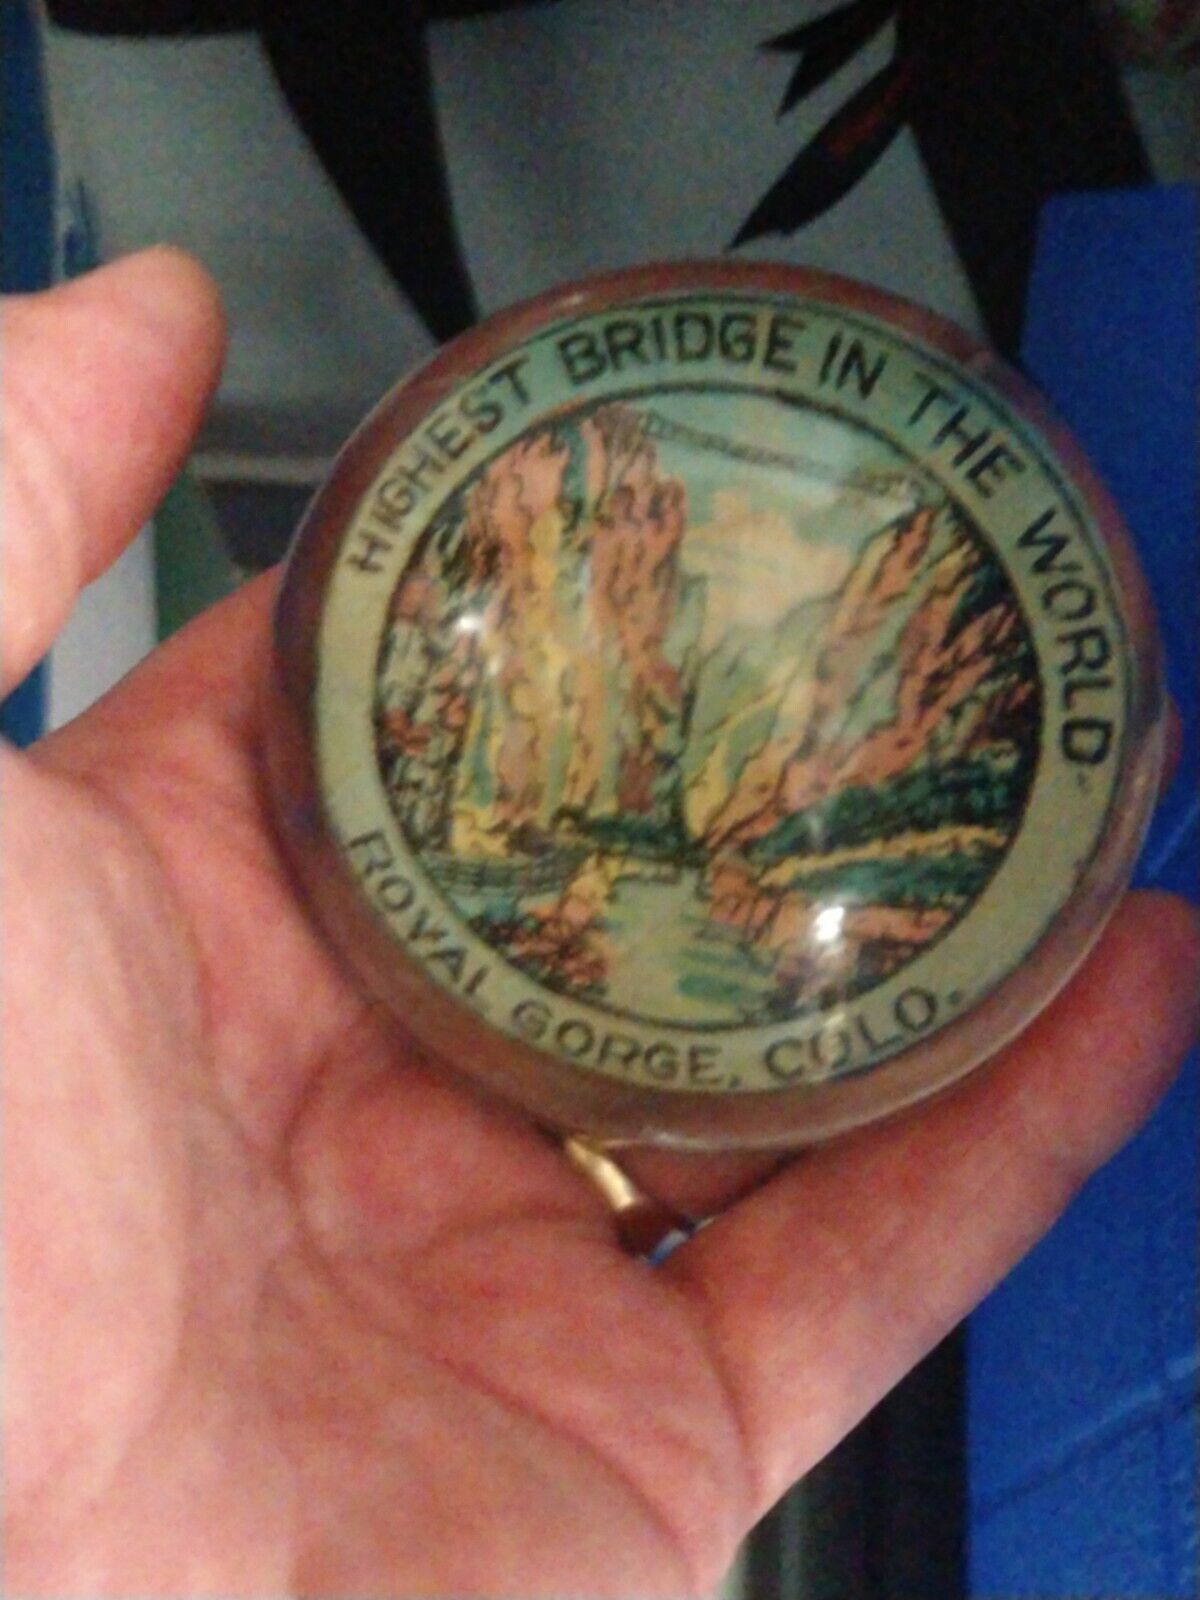 VINTAGE EARLY ROYAL GORGE COLO. HIGHEST BRIDGE IN THE WORLD GLASS PAPER WEIGHT